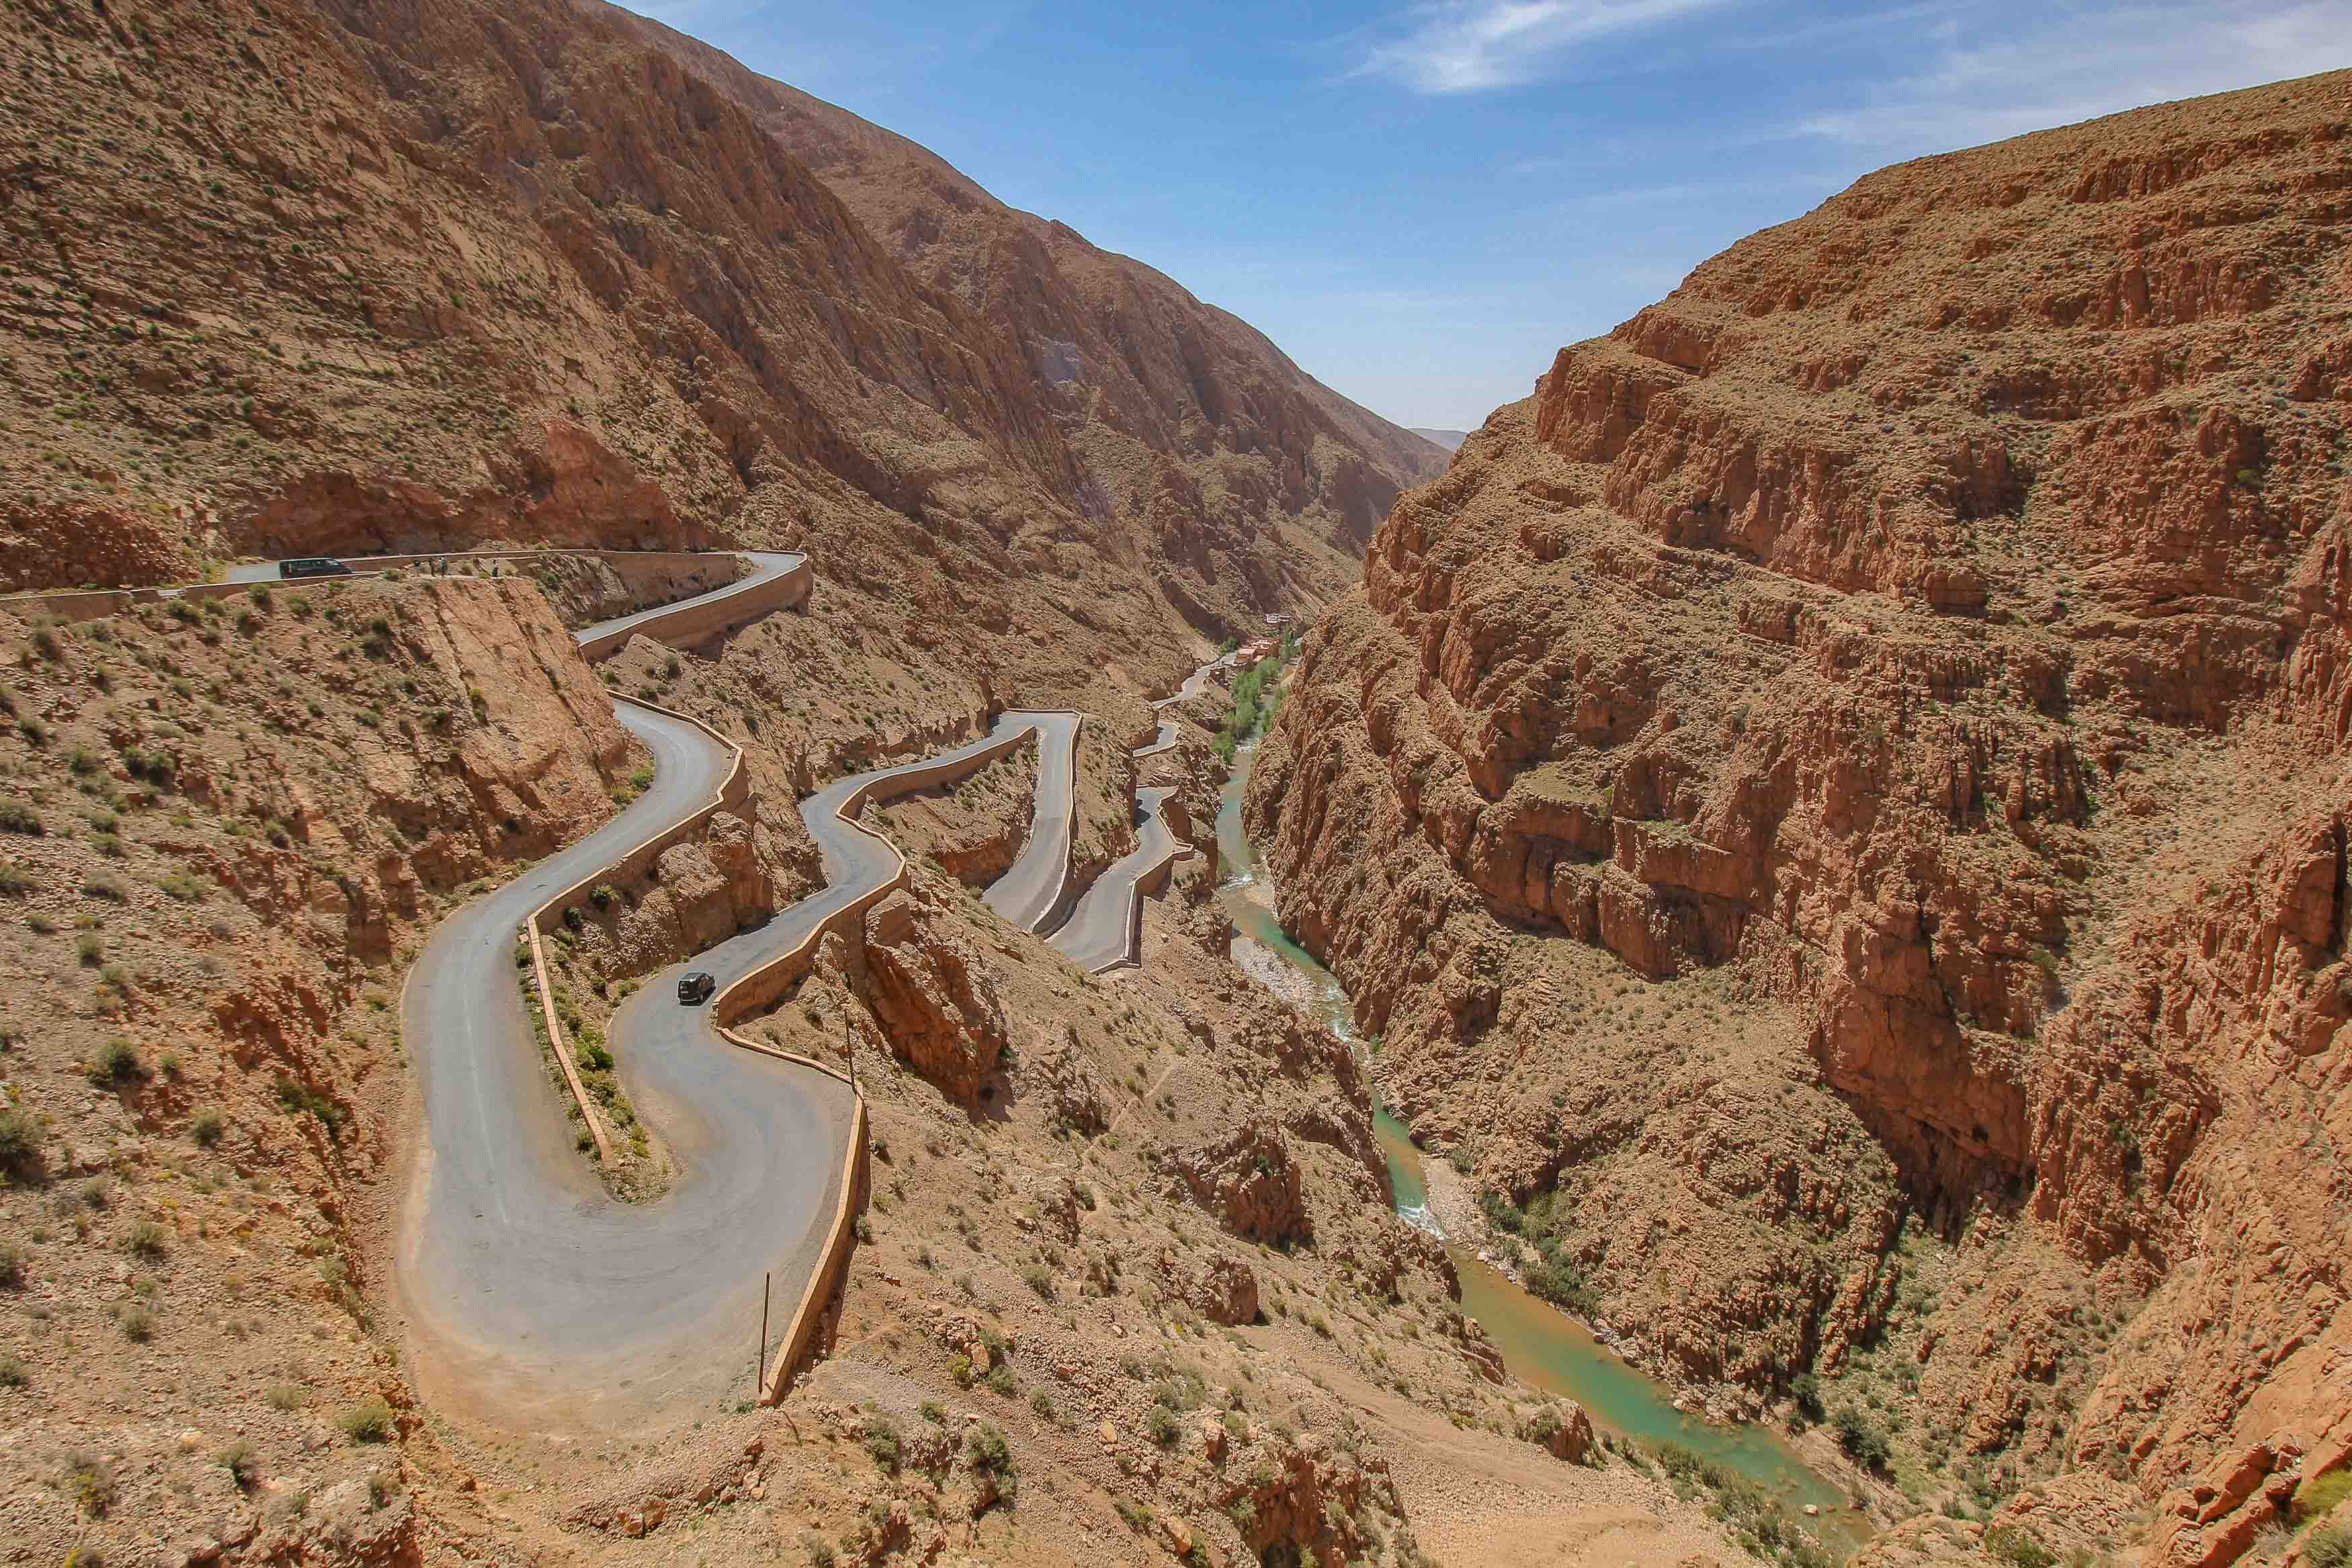 Dades Gorge and the Winding Road in Morocco - PlacesofJuma